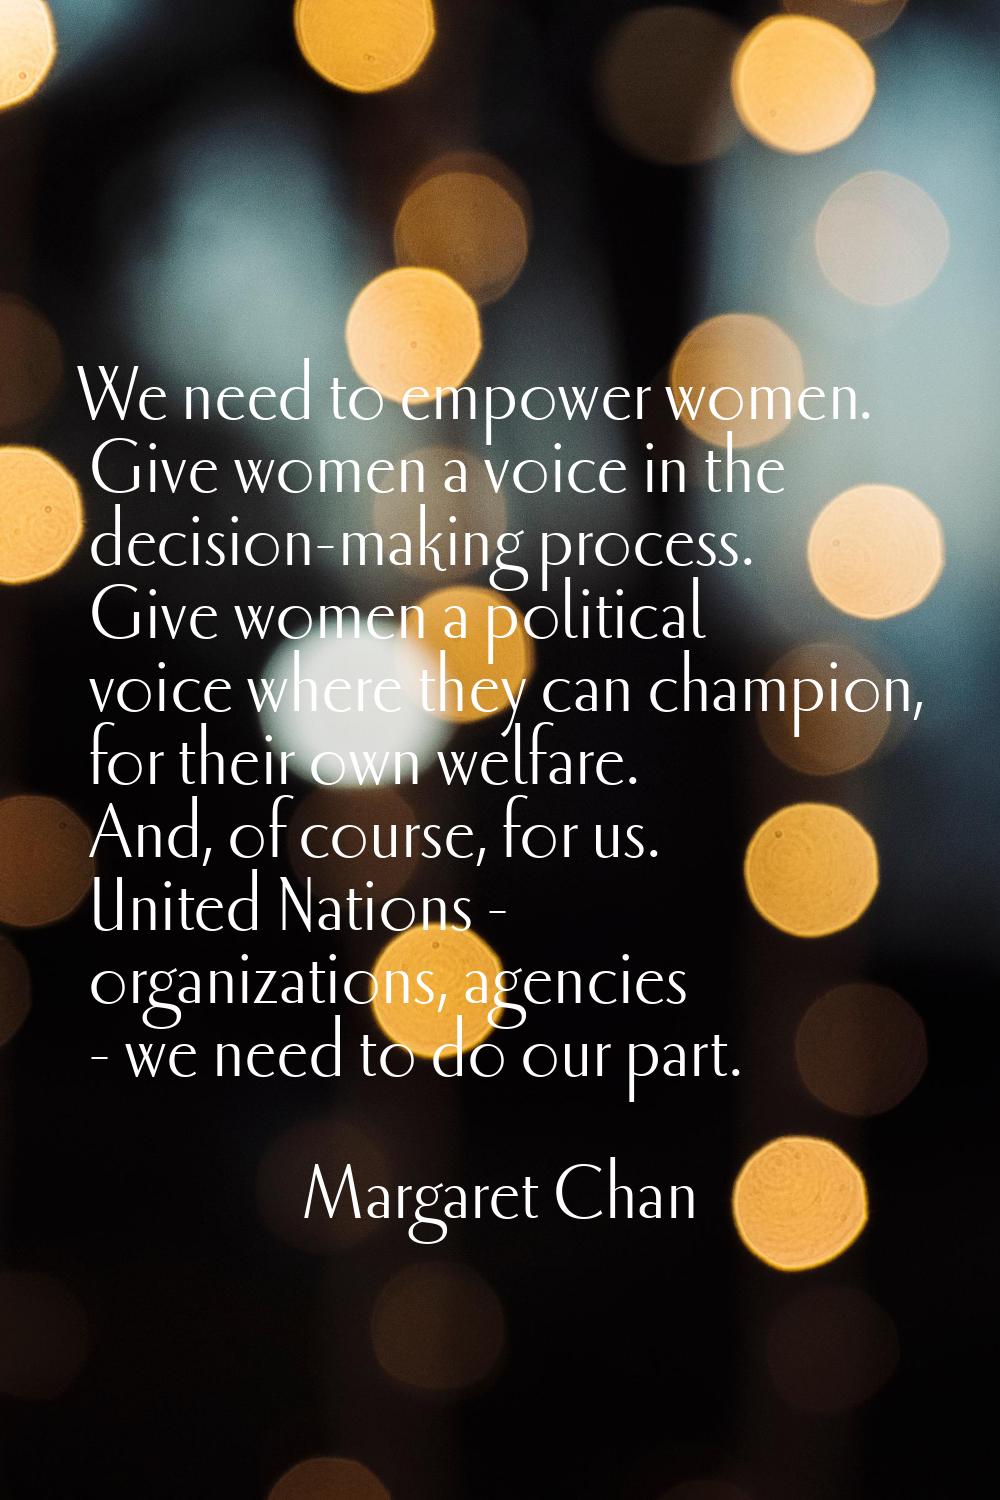 We need to empower women. Give women a voice in the decision-making process. Give women a political